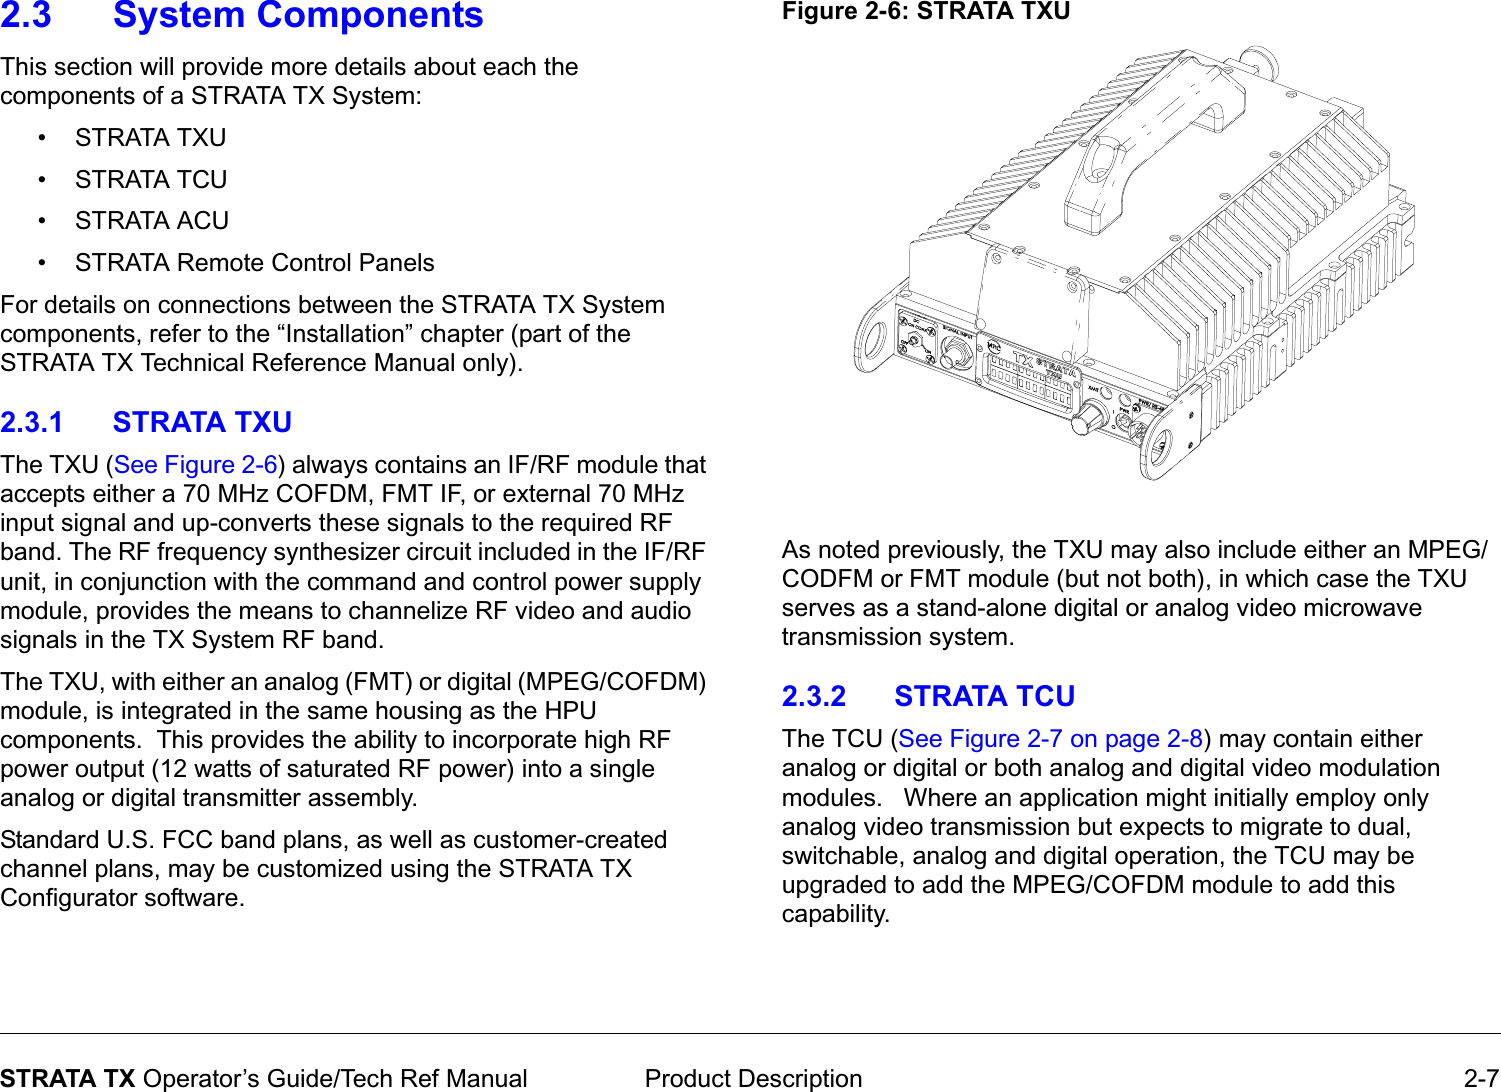  Product Description 2-7STRATA TX Operator’s Guide/Tech Ref Manual2.3 System ComponentsThis section will provide more details about each the components of a STRATA TX System:•STRATA TXU • STRATA TCU •STRATA ACU• STRATA Remote Control PanelsFor details on connections between the STRATA TX System components, refer to the “Installation” chapter (part of the STRATA TX Technical Reference Manual only).2.3.1 STRATA TXUThe TXU (See Figure 2-6) always contains an IF/RF module that accepts either a 70 MHz COFDM, FMT IF, or external 70 MHz input signal and up-converts these signals to the required RF band. The RF frequency synthesizer circuit included in the IF/RF unit, in conjunction with the command and control power supply module, provides the means to channelize RF video and audio signals in the TX System RF band.The TXU, with either an analog (FMT) or digital (MPEG/COFDM) module, is integrated in the same housing as the HPU components.  This provides the ability to incorporate high RF power output (12 watts of saturated RF power) into a single analog or digital transmitter assembly.Standard U.S. FCC band plans, as well as customer-created channel plans, may be customized using the STRATA TX Configurator software.Figure 2-6: STRATA TXUAs noted previously, the TXU may also include either an MPEG/CODFM or FMT module (but not both), in which case the TXU serves as a stand-alone digital or analog video microwave transmission system. 2.3.2 STRATA TCUThe TCU (See Figure 2-7 on page 2-8) may contain either analog or digital or both analog and digital video modulation modules.   Where an application might initially employ only analog video transmission but expects to migrate to dual, switchable, analog and digital operation, the TCU may be upgraded to add the MPEG/COFDM module to add this capability.